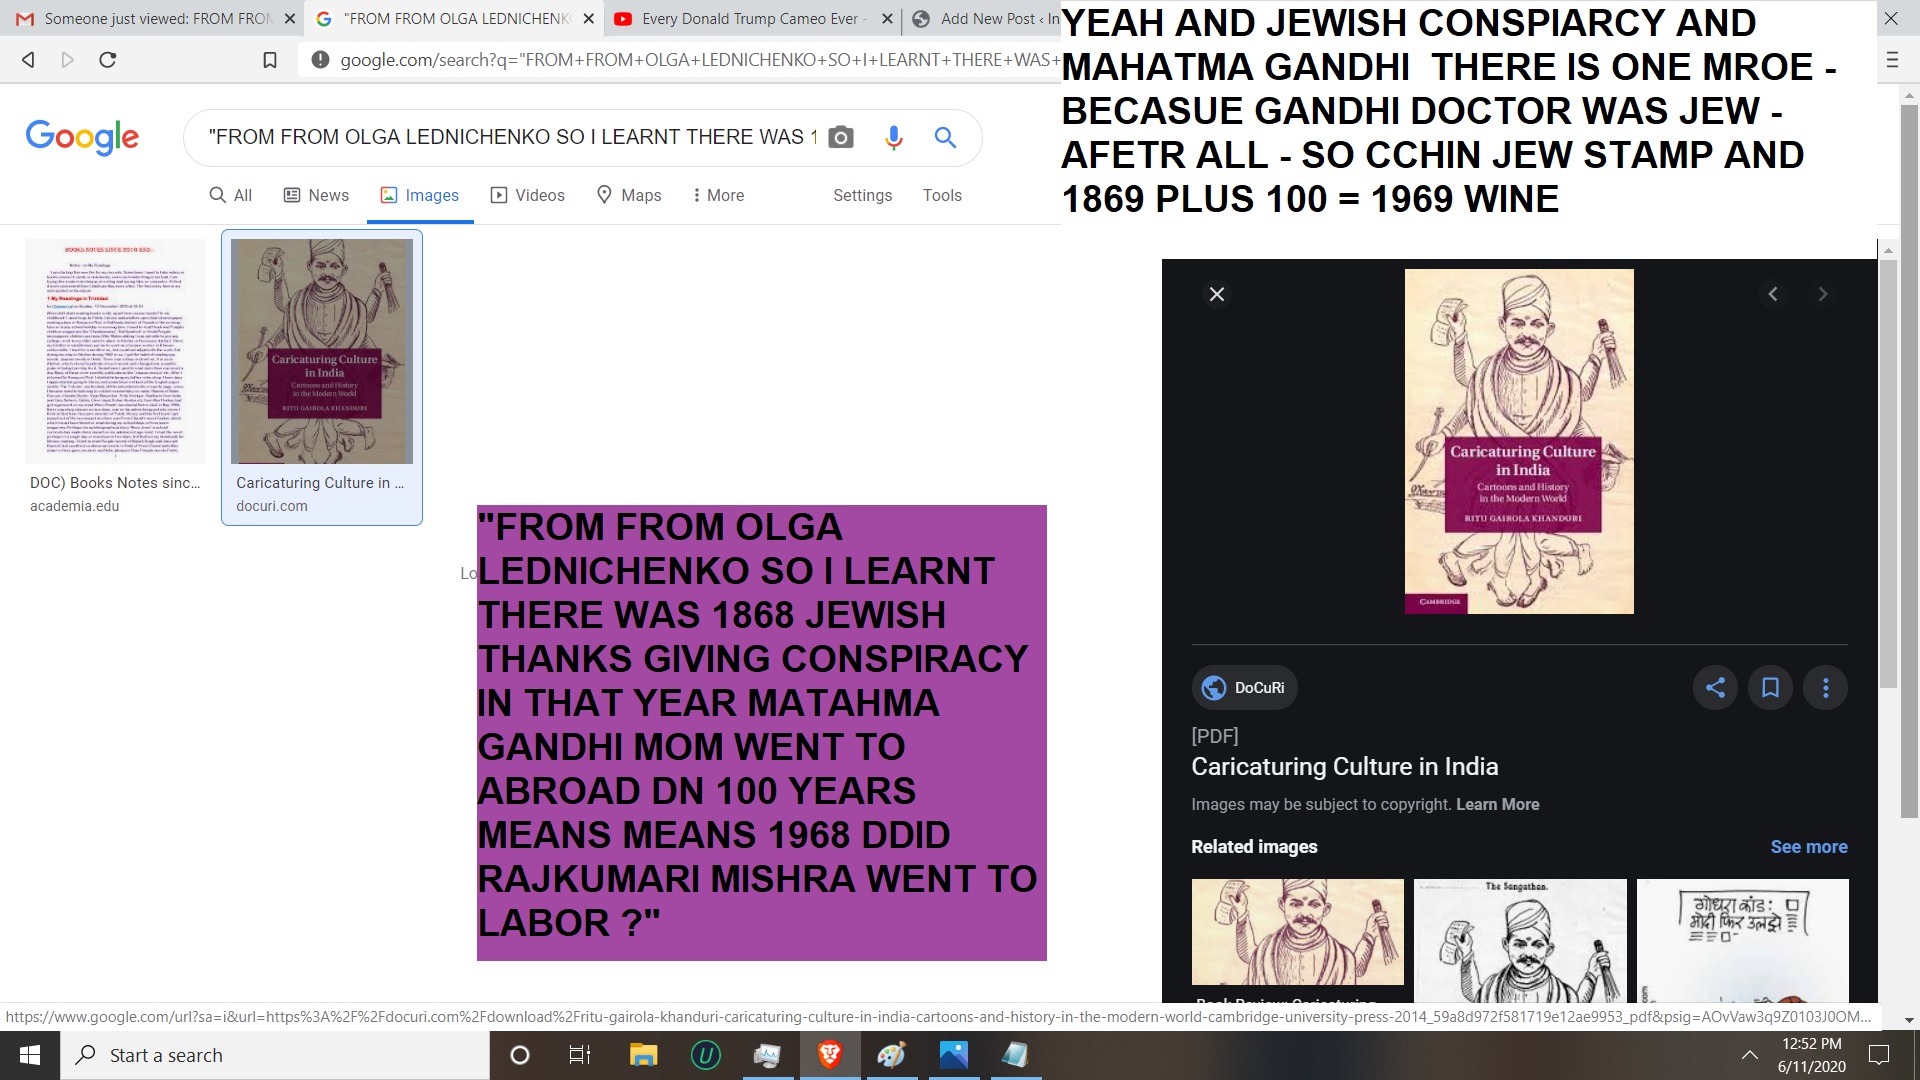 FROM FROM OLGA LEDNICHENKO SO I LEARNT THERE WAS 1868 JEWISH THANKS GIVING CONSPIRACY IN THAT YEAR MATAHMA GANDHI MOM WENT TO ABROAD DN 100 YEARS MEANS MEANS 1968 DDID RAJKUMARI MISHRA WENT TO LABOR --